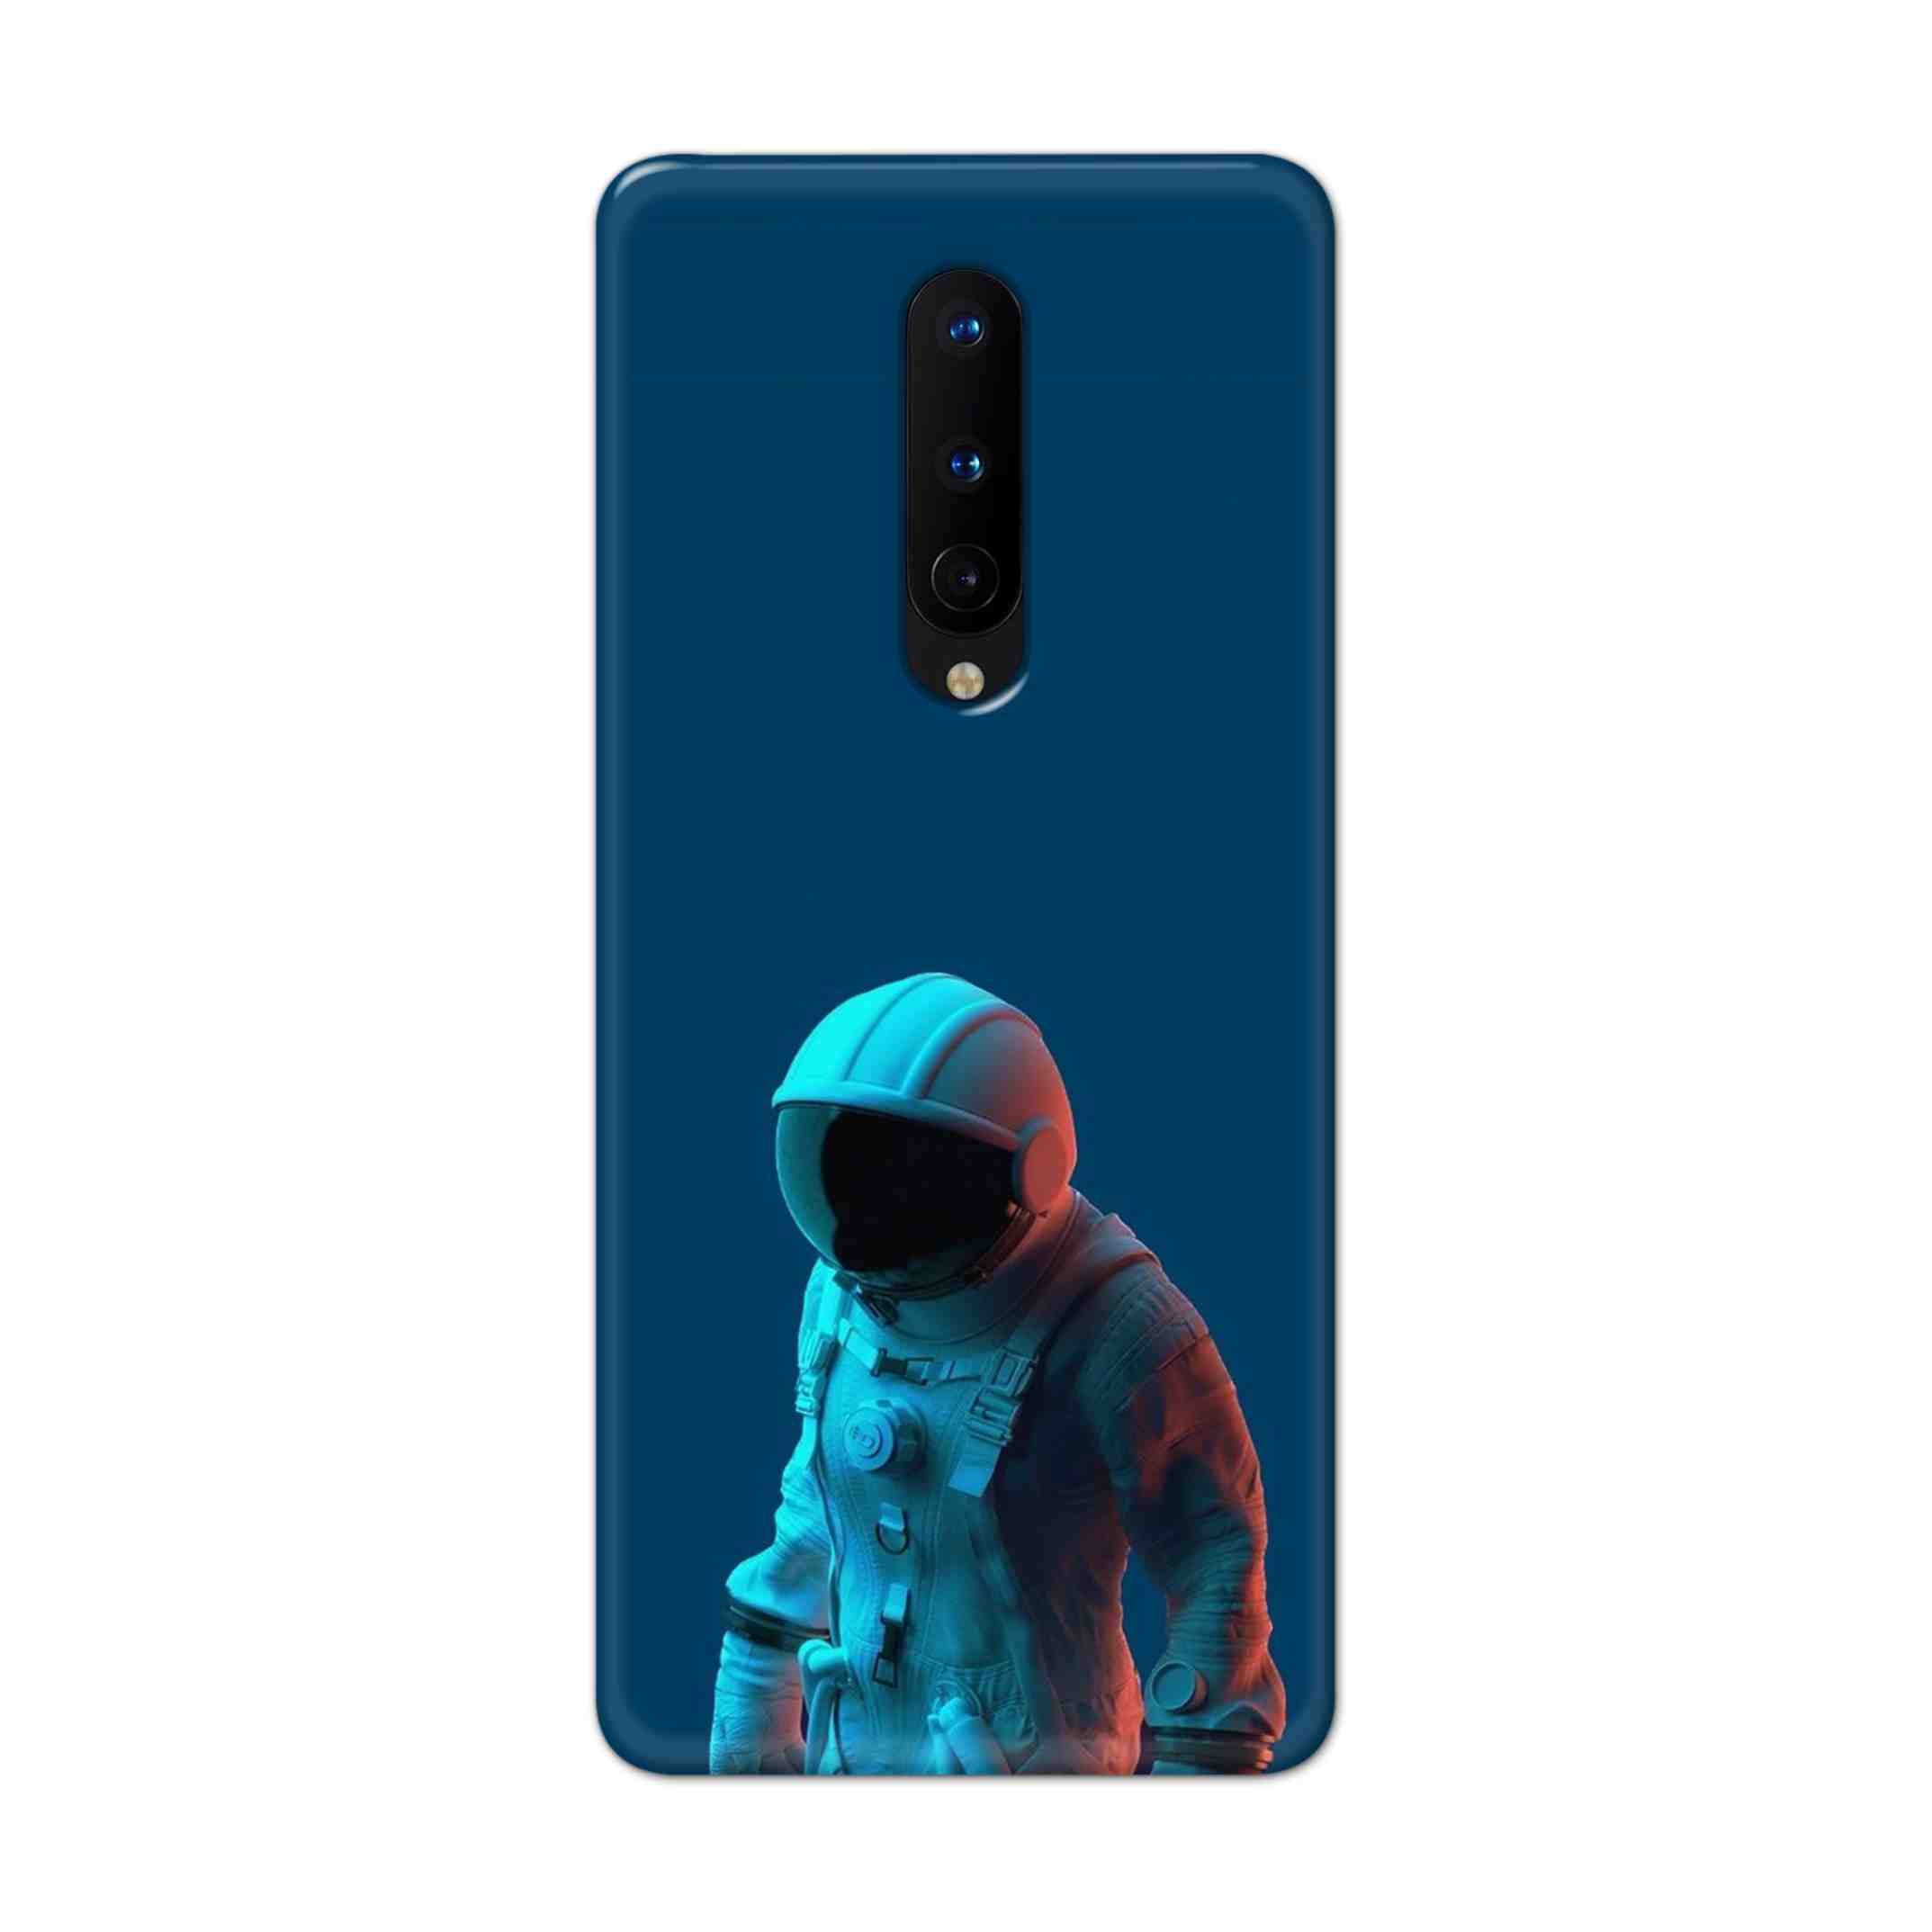 Buy Blue Astronaut Hard Back Mobile Phone Case Cover For OnePlus 8 Online